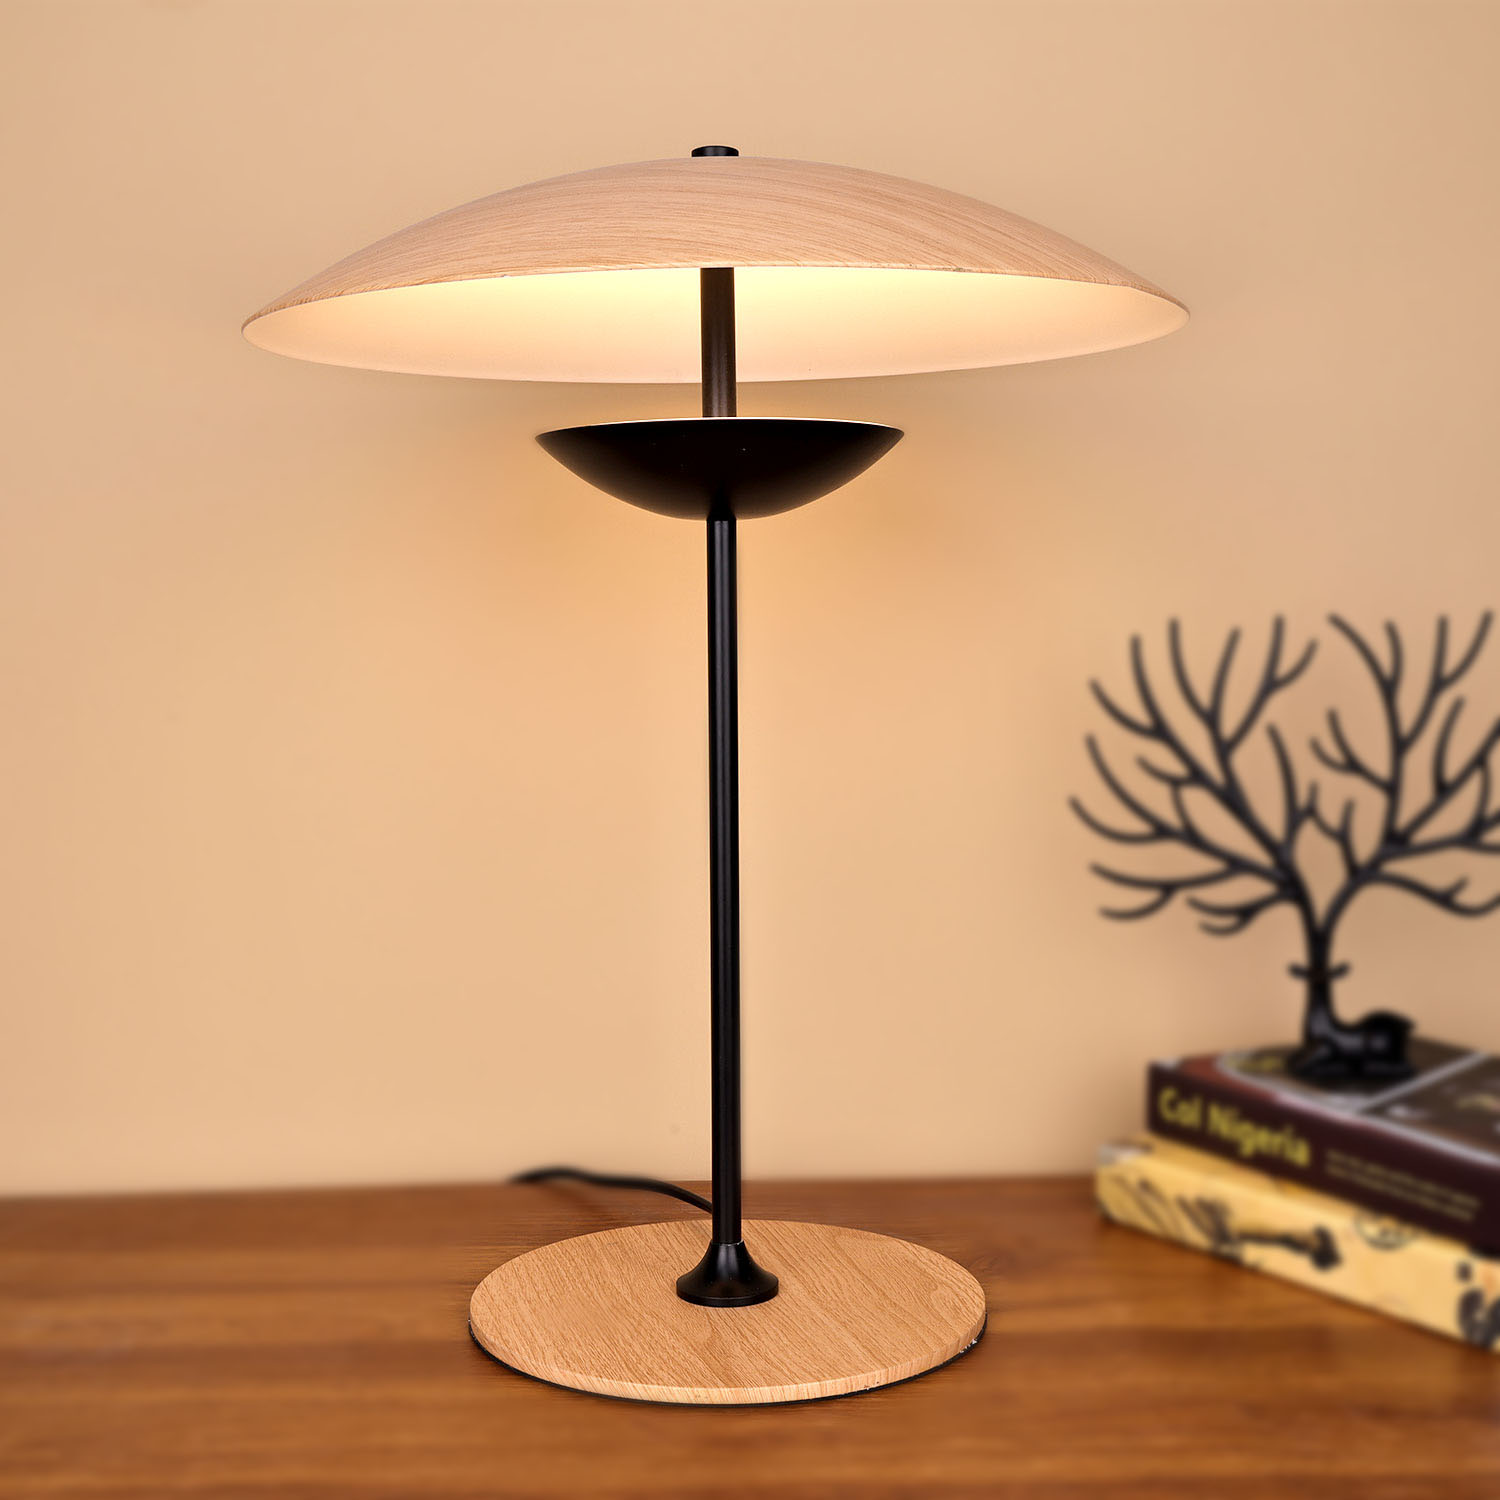 Table lamp with wooden shade